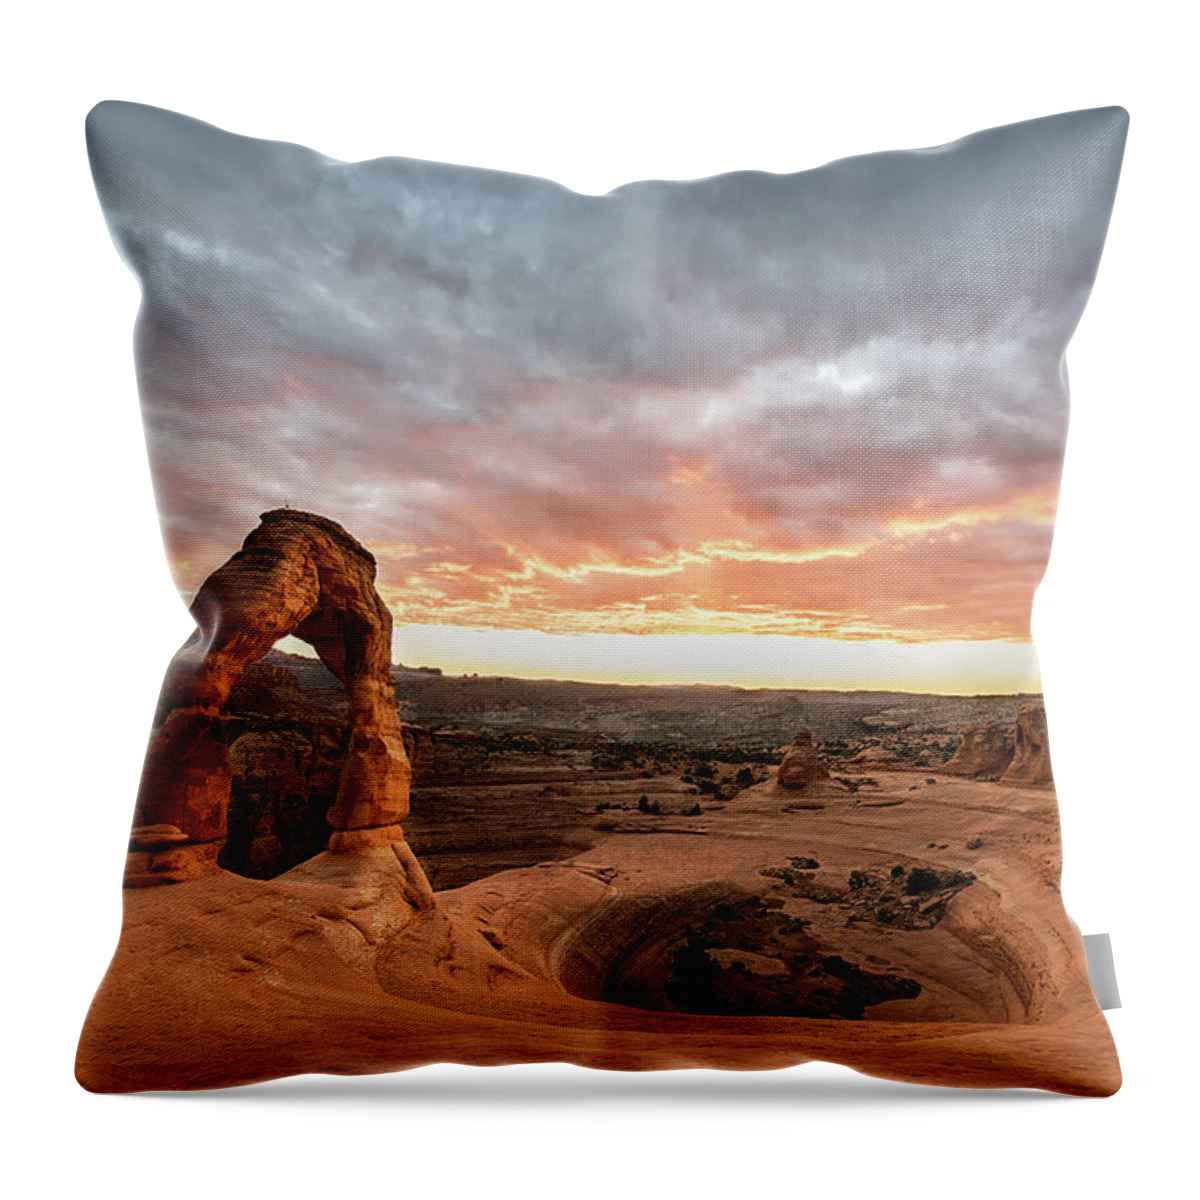 Photograph Throw Pillow featuring the photograph Delicate at Sunset by Jon Glaser